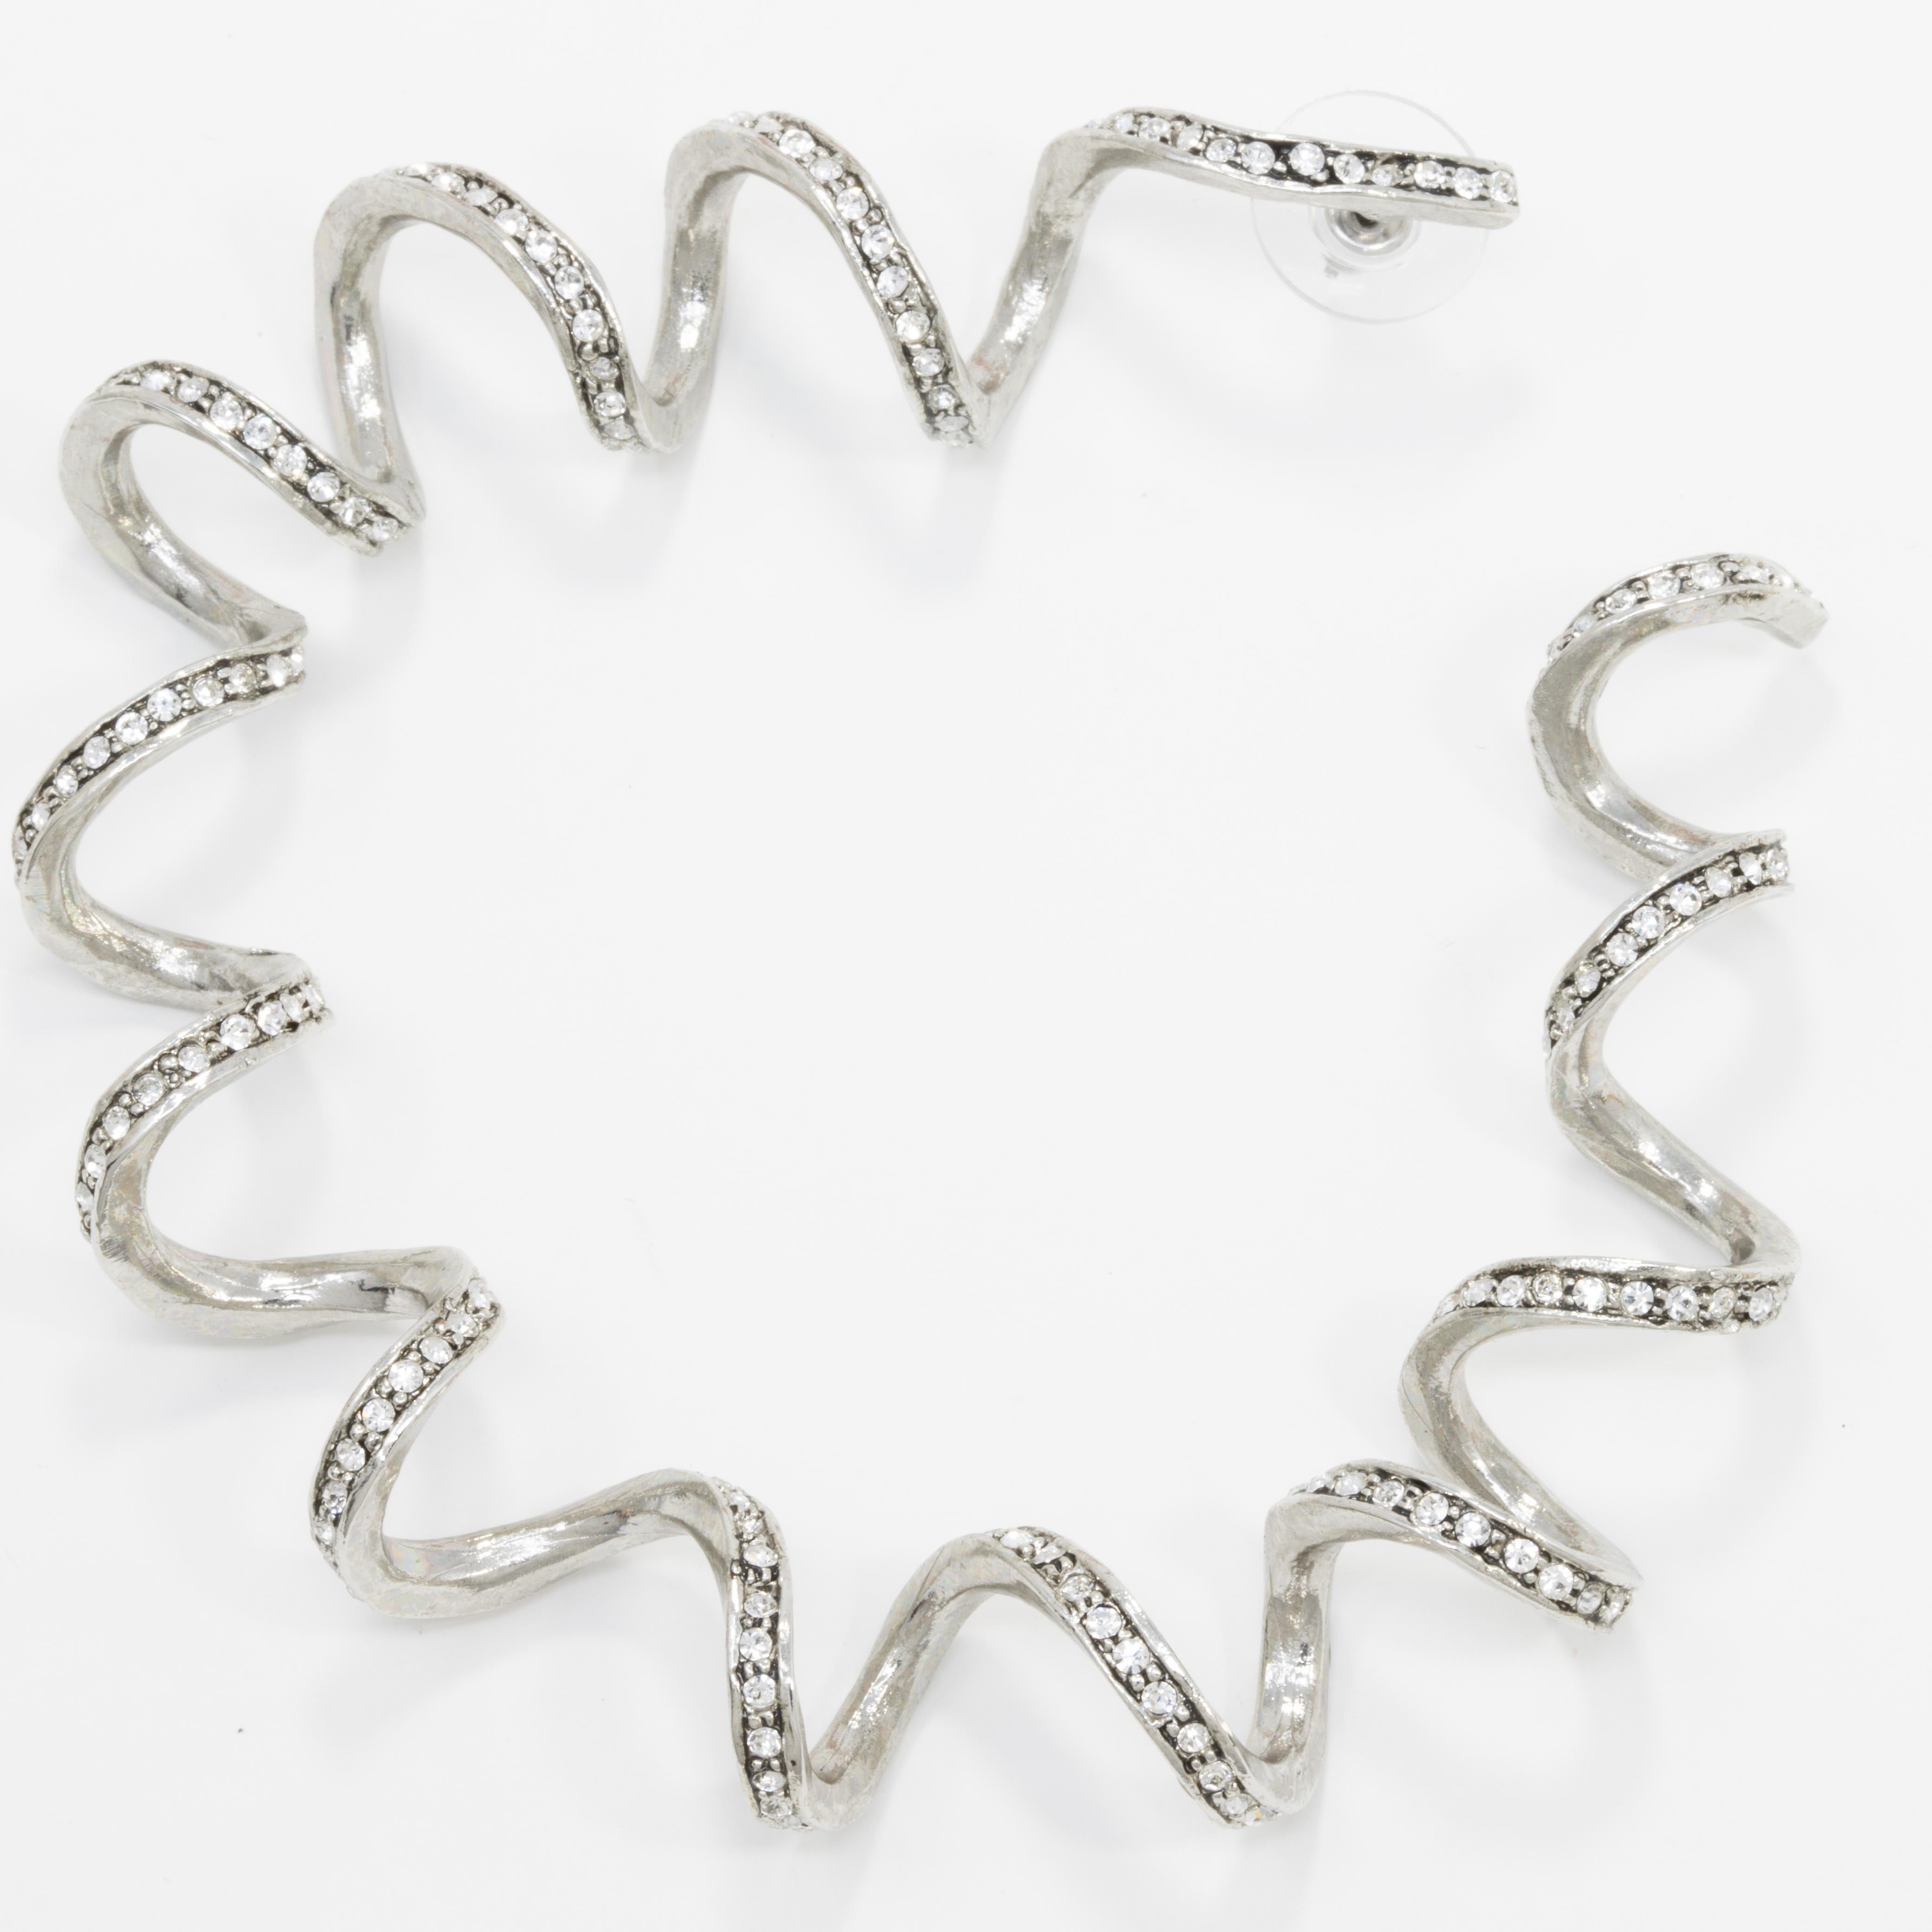 Bold twisted curl hoop earrings accented with clear Swarovski crystals. Add a sophisticated silver glow to your outfit!

By Oscar de la Renta.

Rhodium plated. Post backs.

Hallmarks: none